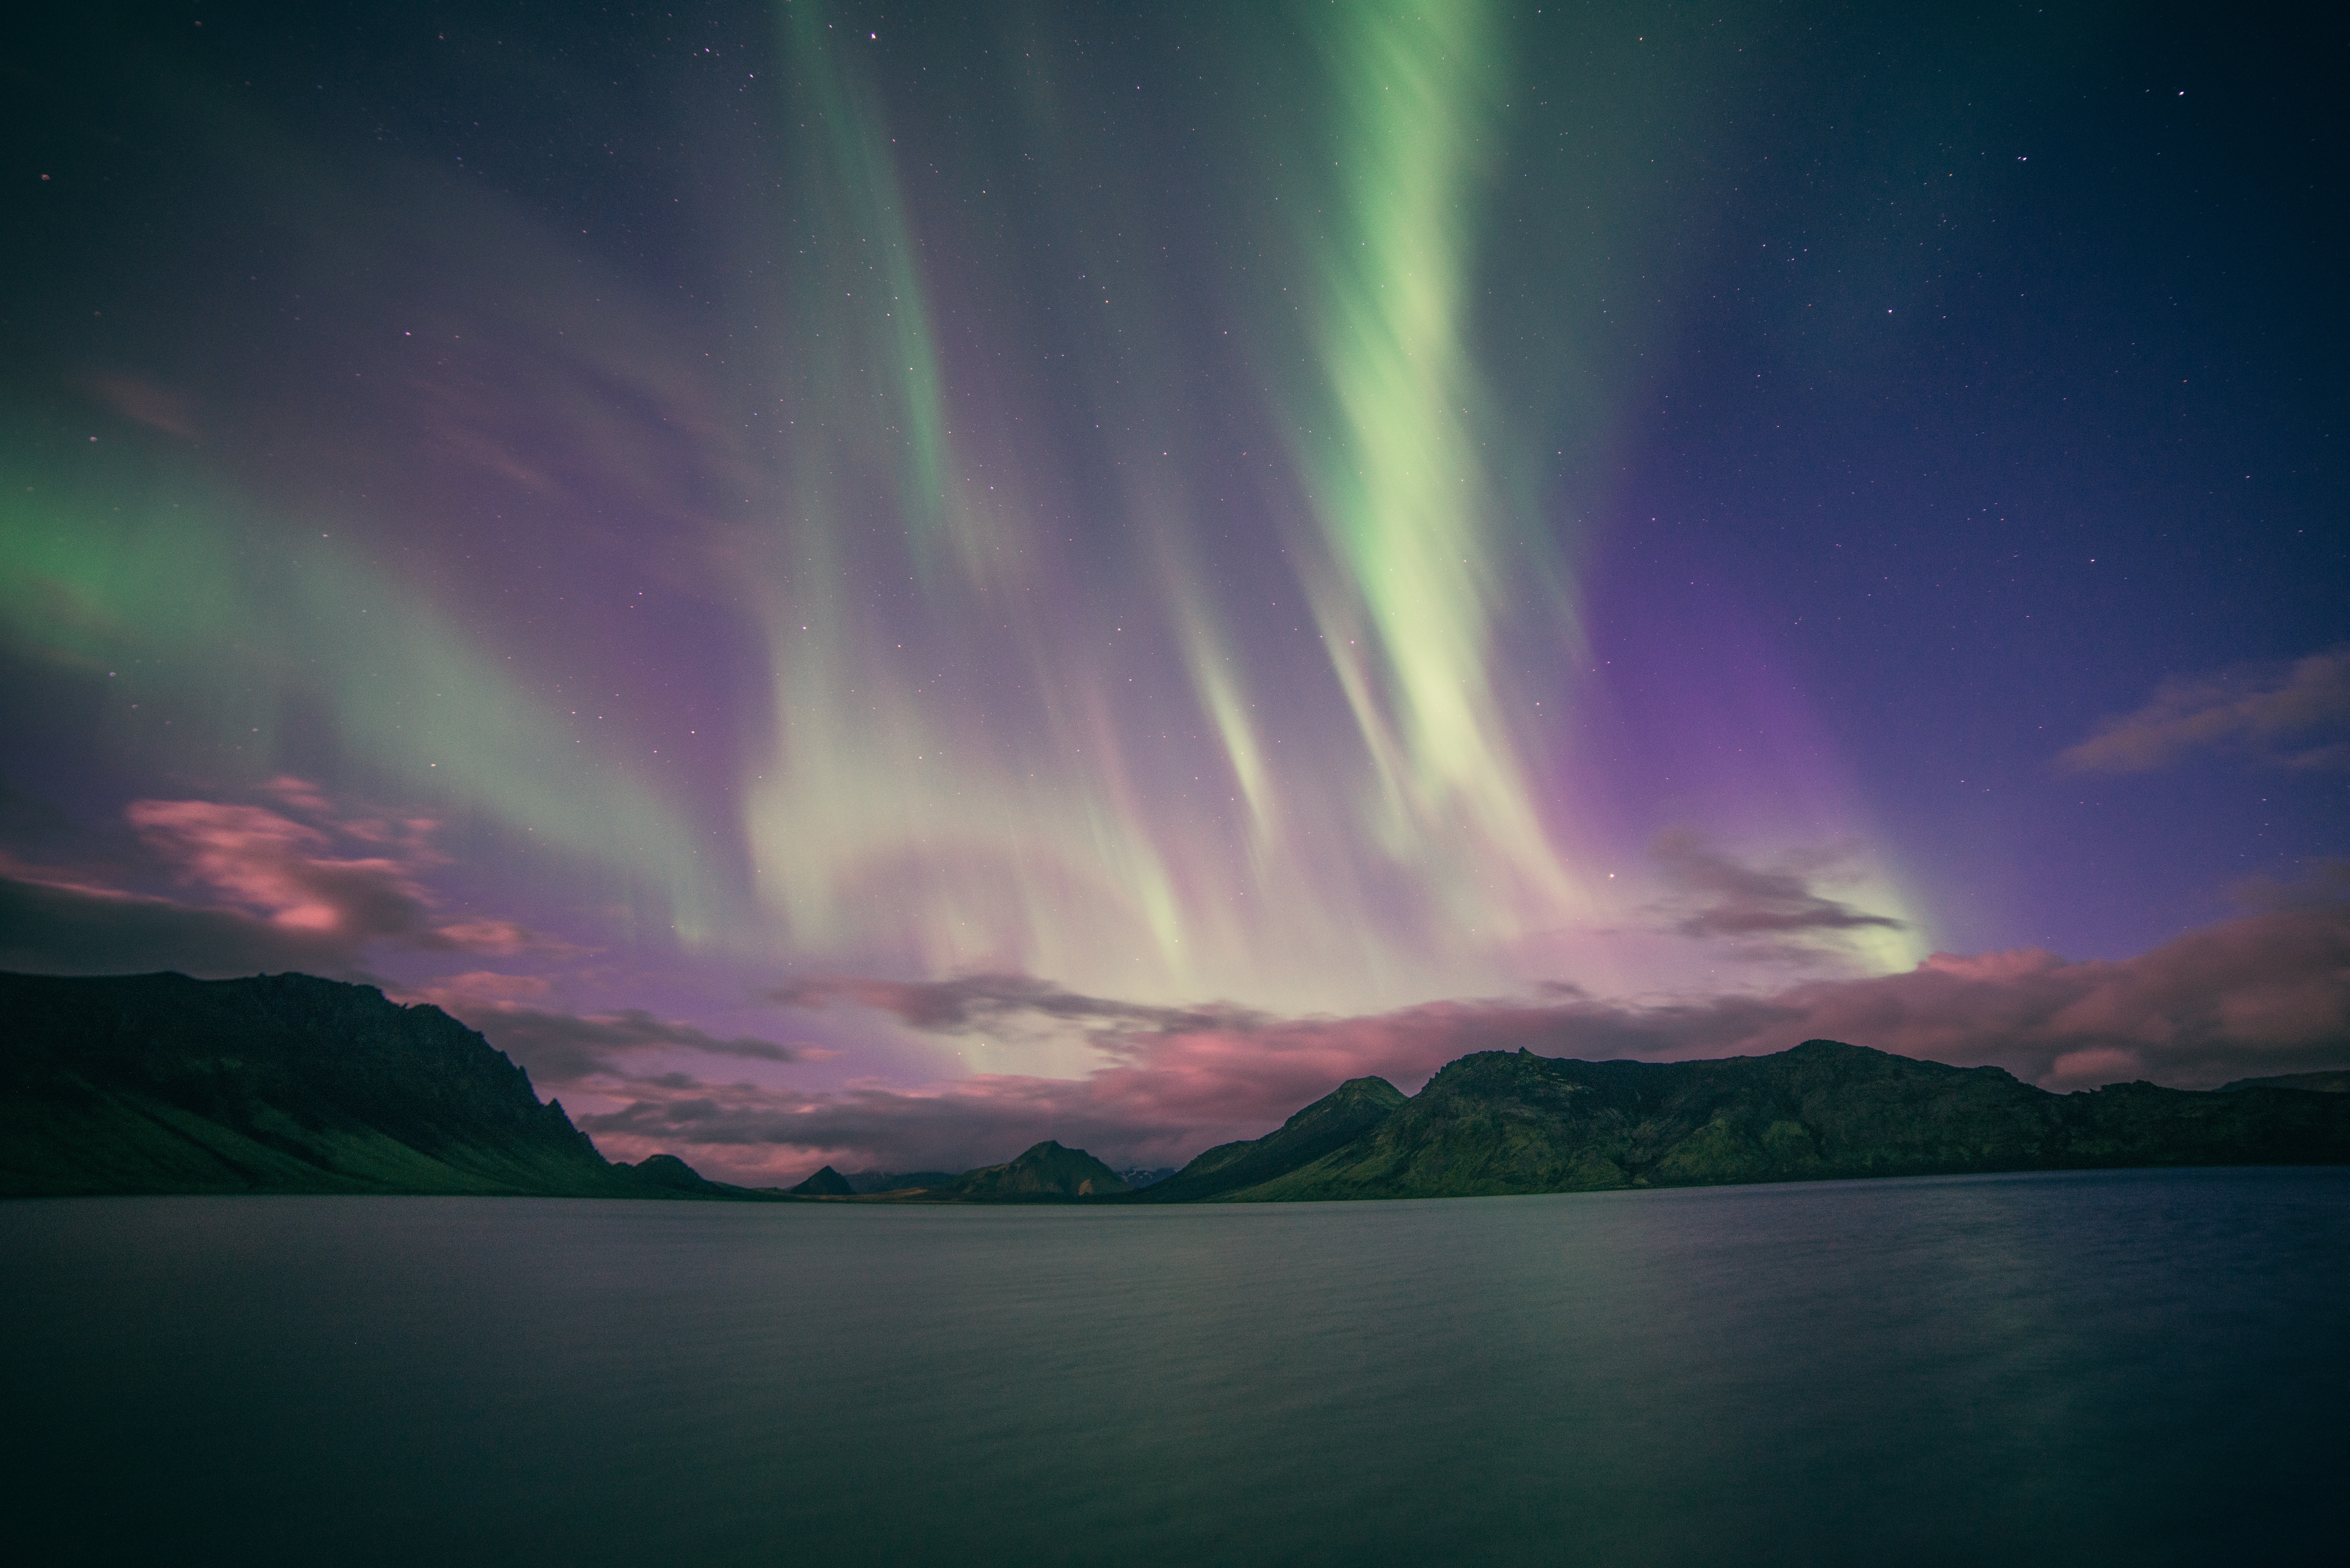 General 7360x4912 nature mountains aurorae water low light